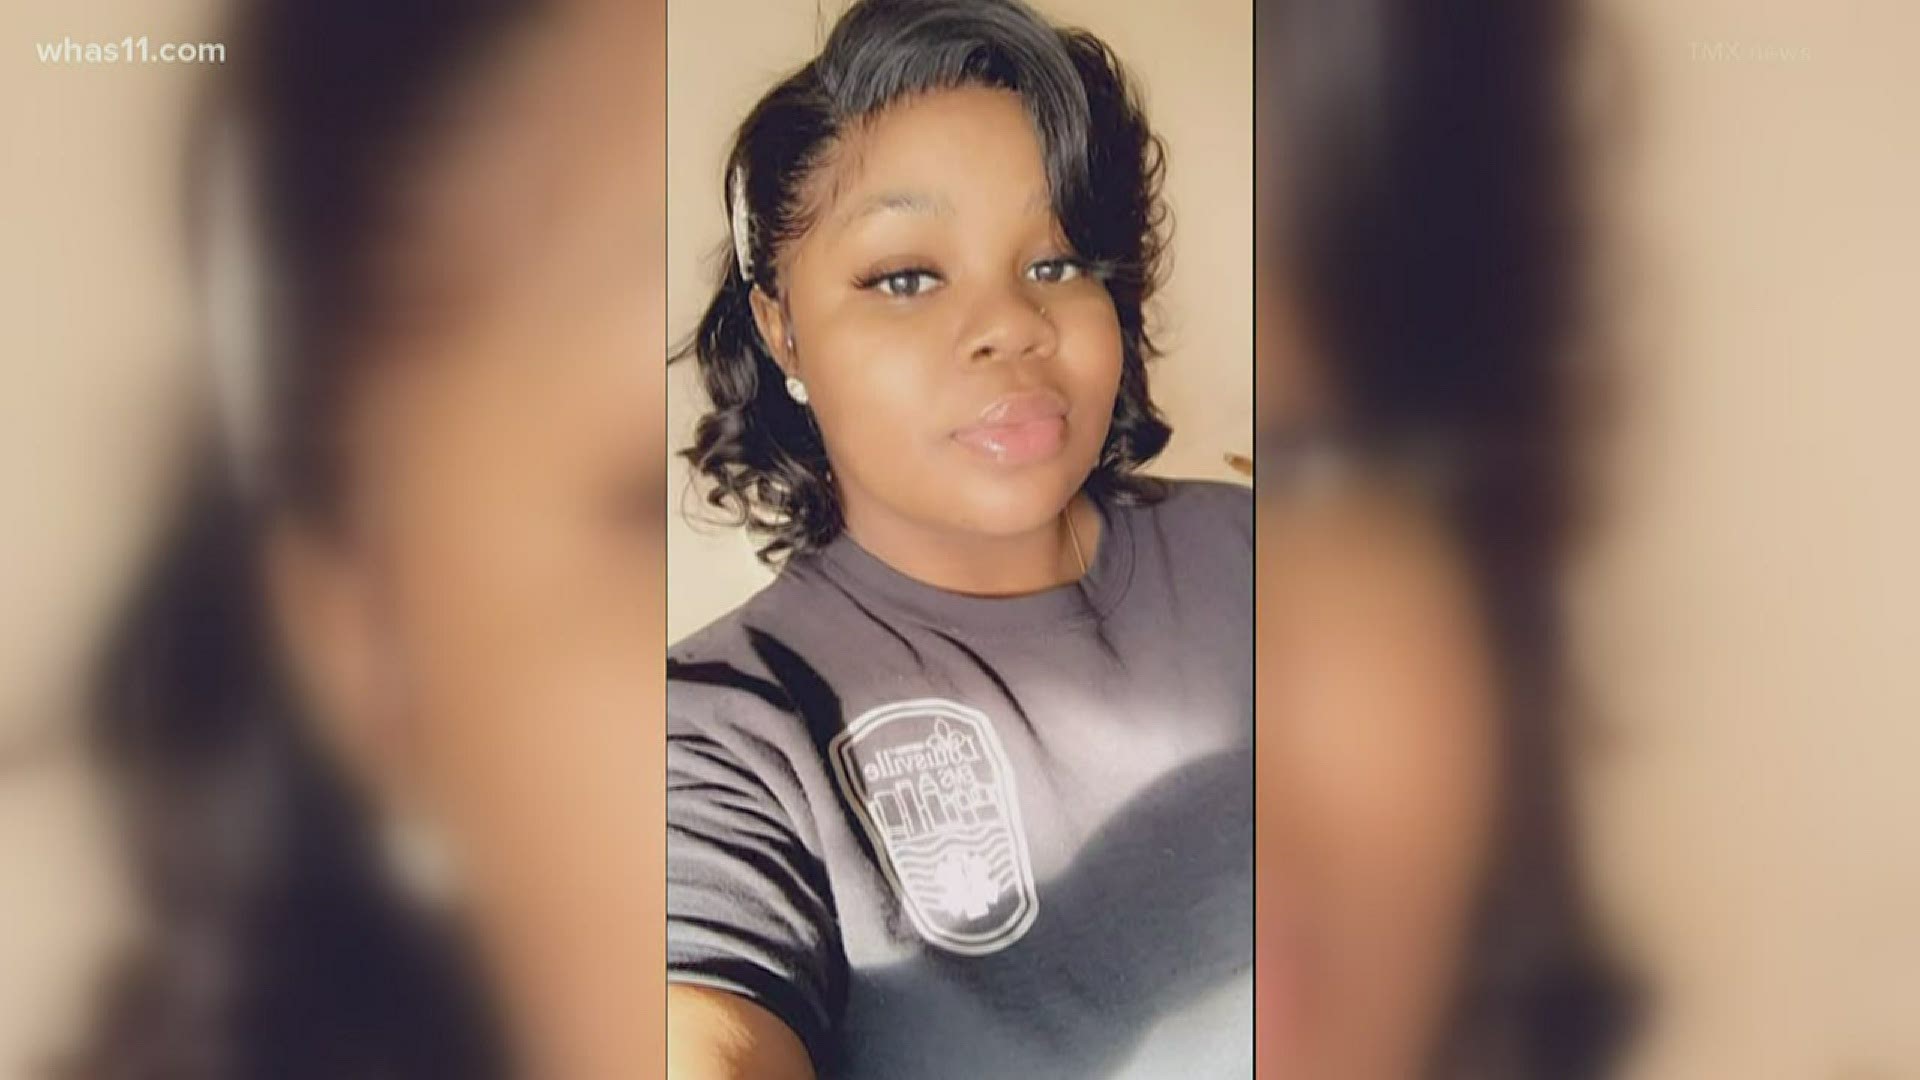 Louisville Metro Police say they are close to completing their investigation into the police shooting that resulted in the death of an EMT. today the police chief is